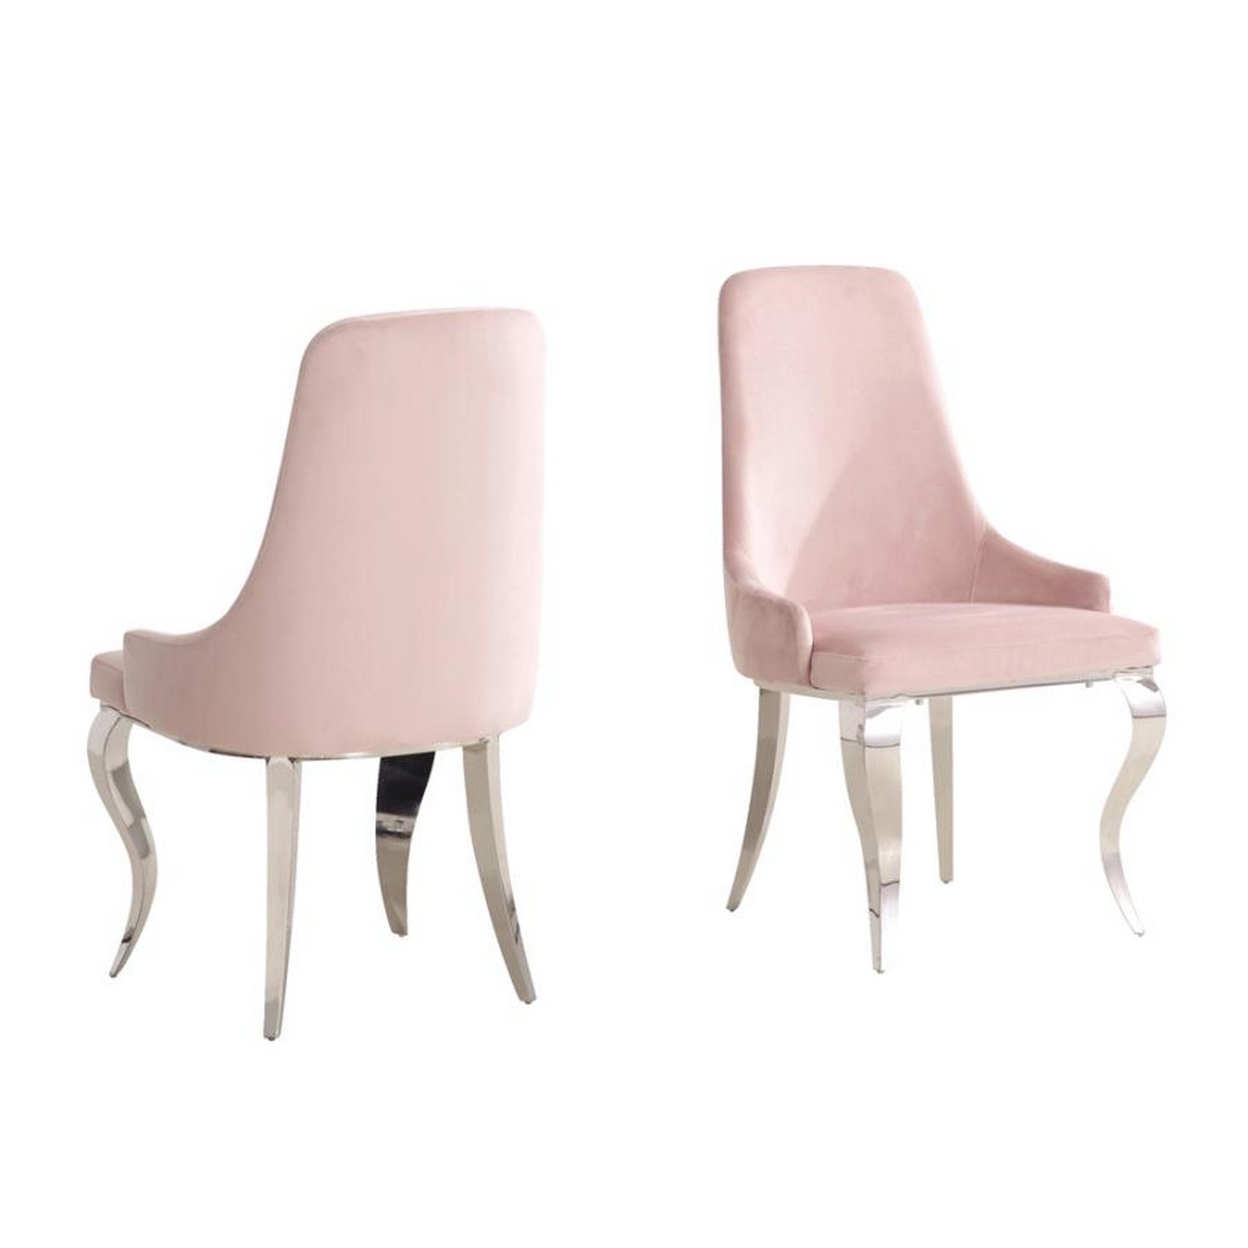 Dining Chair With Fabric Seat And Metal Legs, Set Of 2, Pink- Saltoro Sherpi